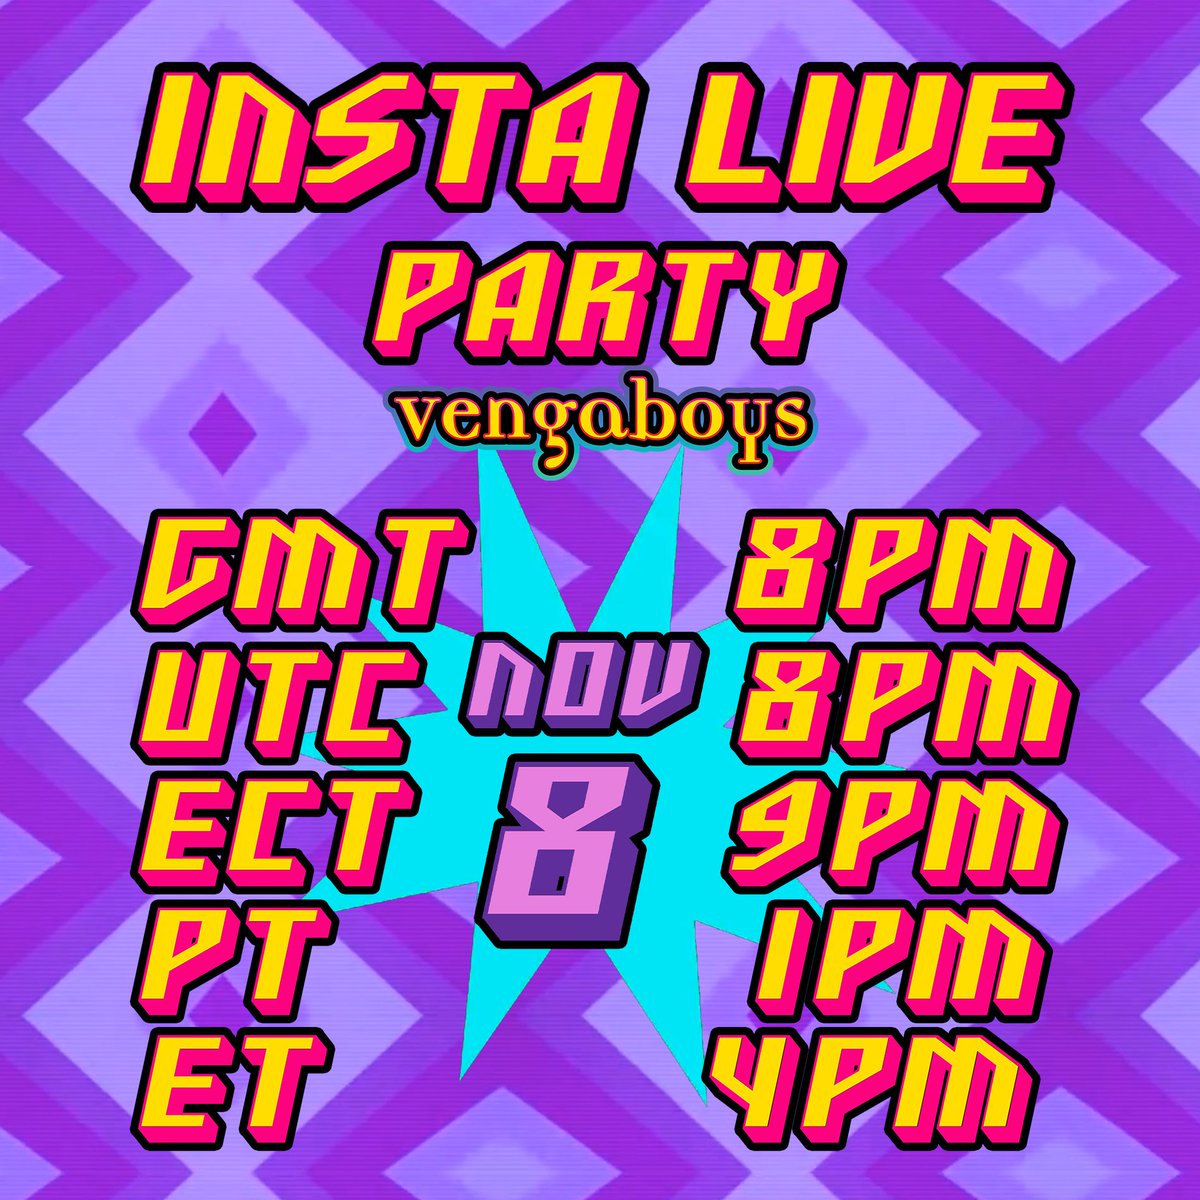 Going live today on IG with a Q&A!! Let's vibe and get to know each other a little bit more off-stage🥳 If you have any burning questions, now is your chance to get answers😌 Happening in 10hrs🤟 Come say hi!! #live instagram.com/Vengaboys